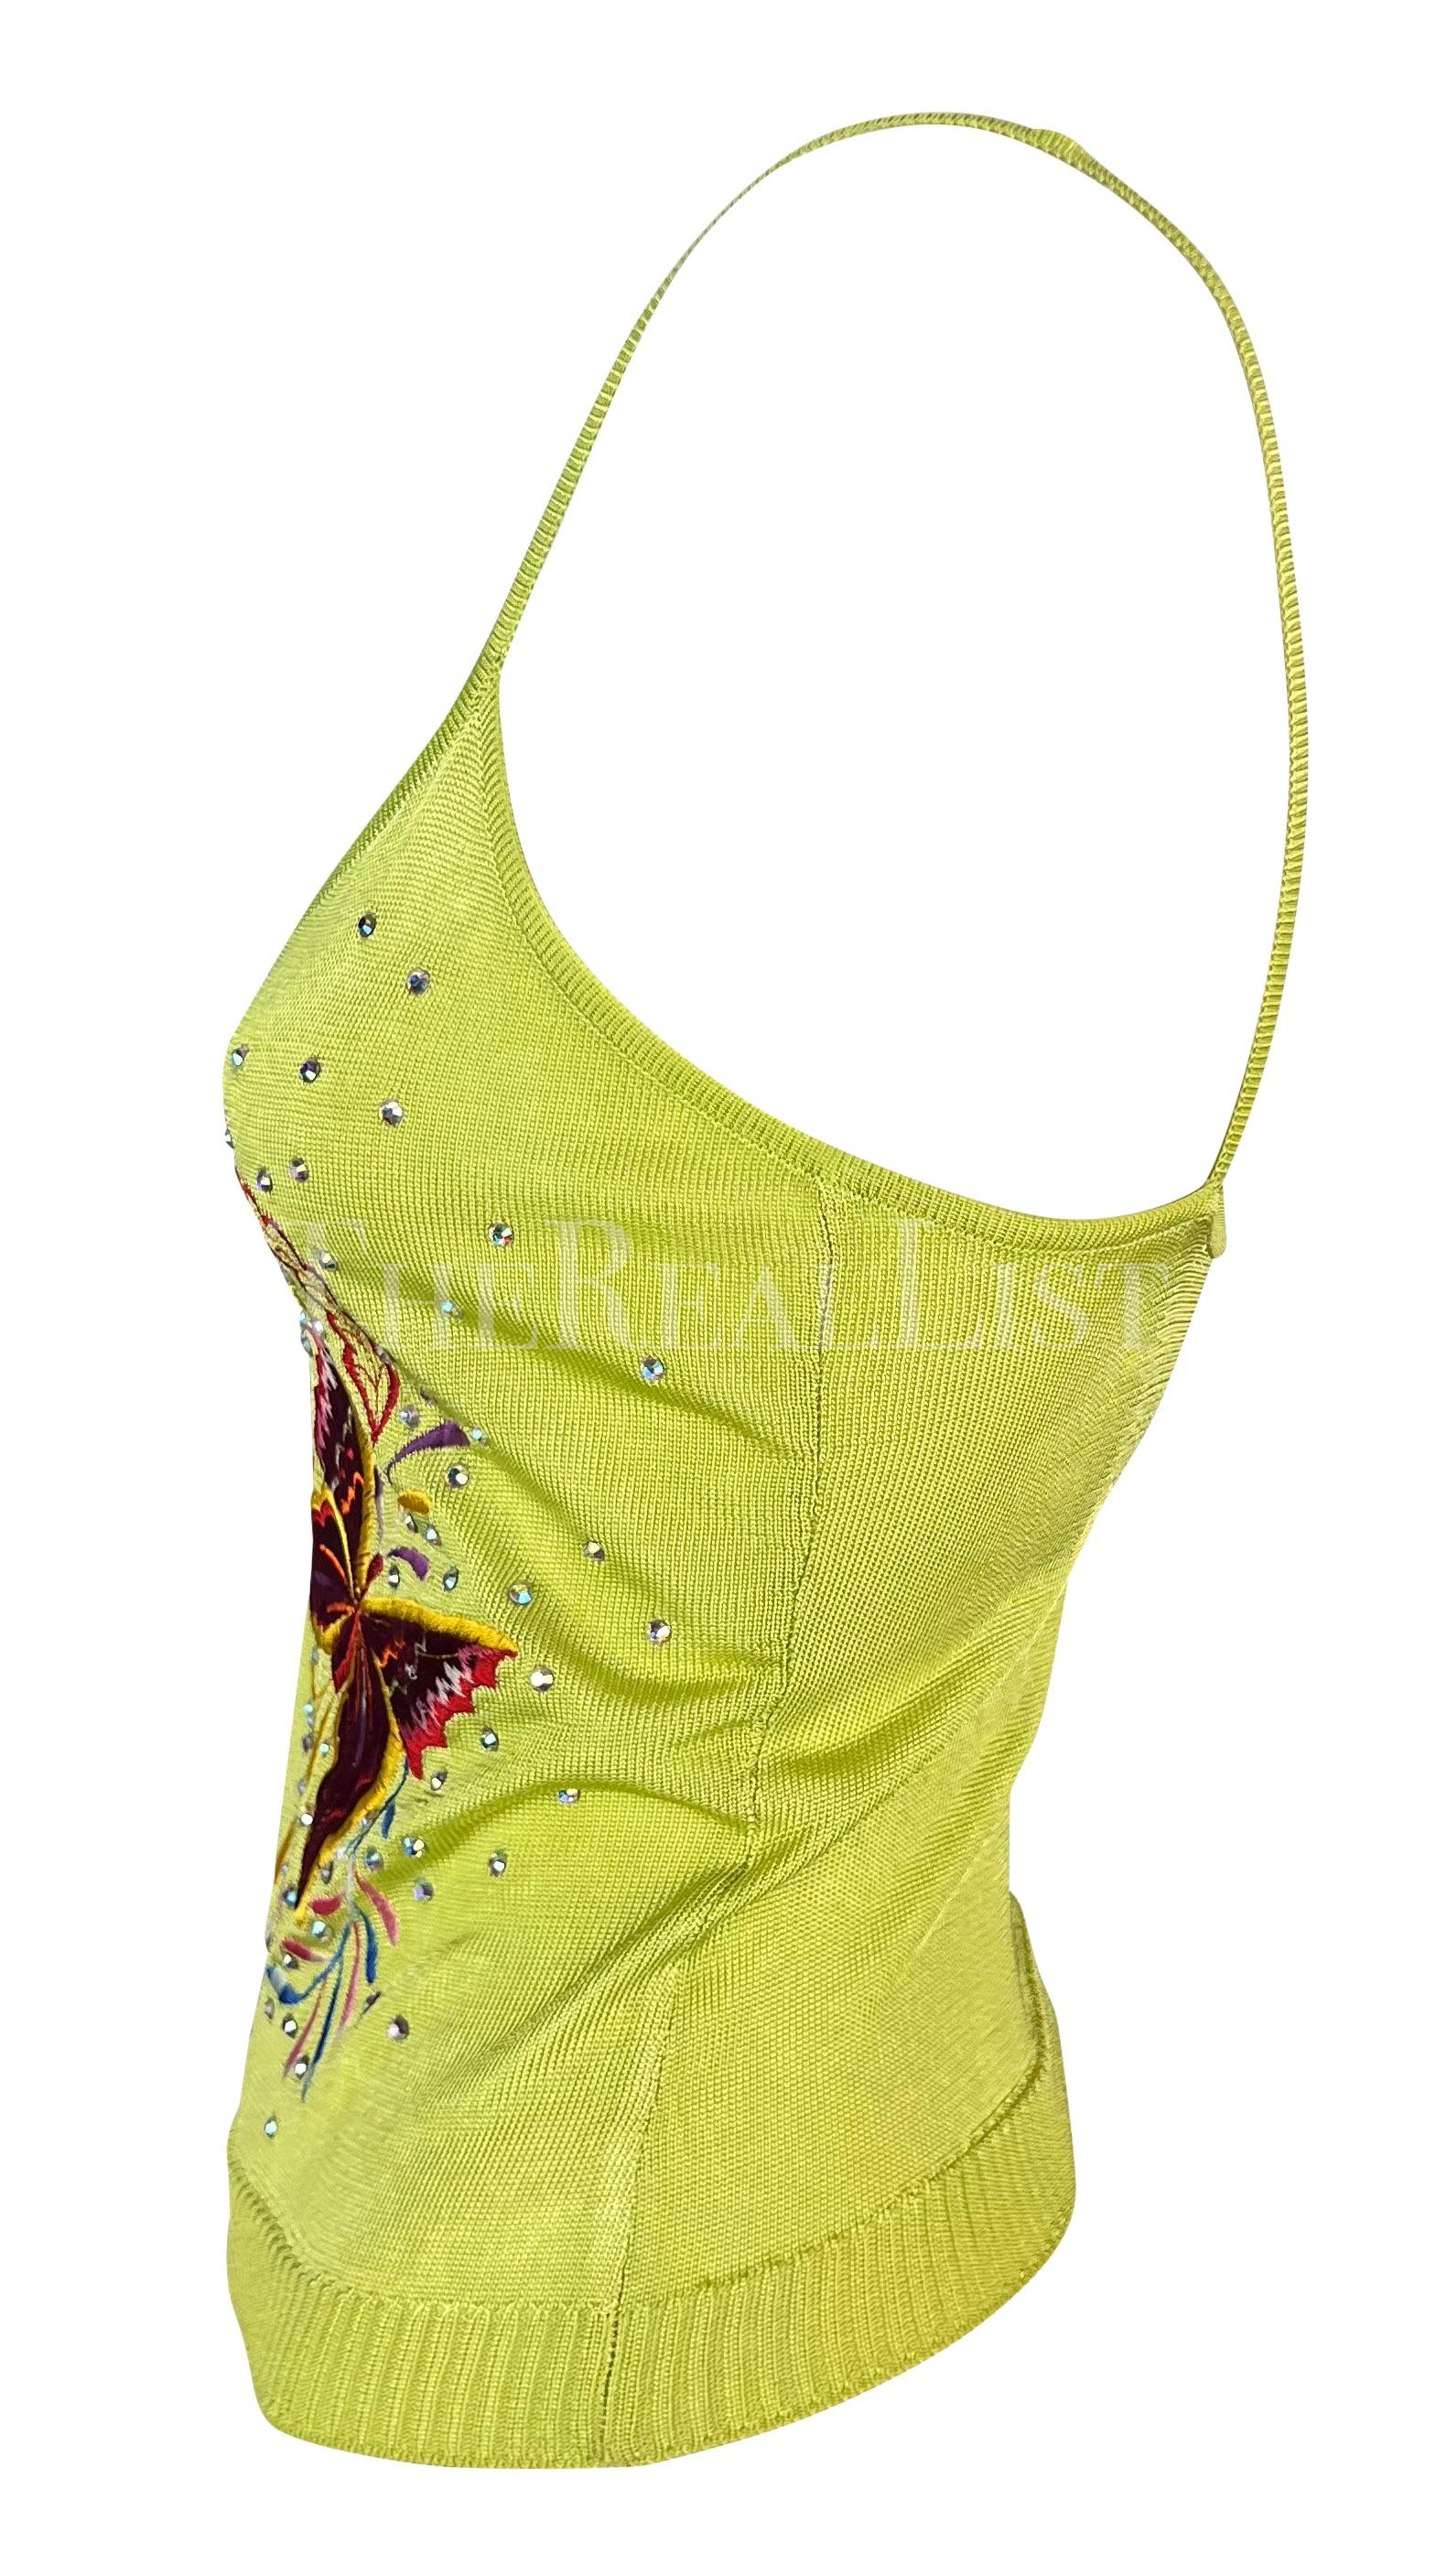 S/S 2002 Christian Dior by John Galliano for Butterfly Embellished Knit Tank Top  4